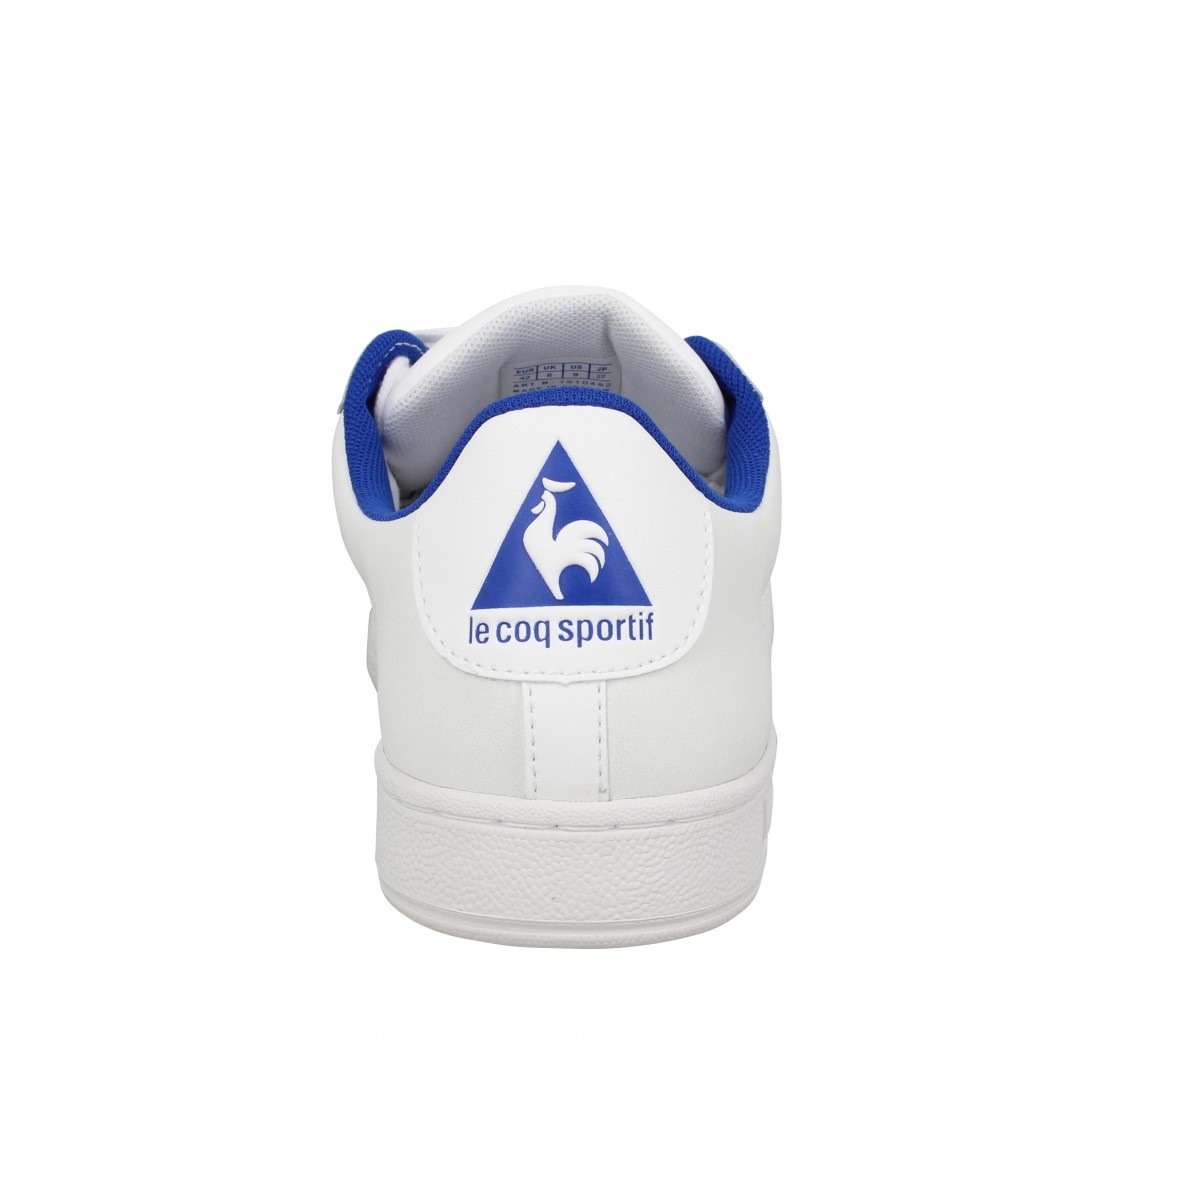 Brood straal Wanorde Le coq sportif arthur ashe sport cuir homme blanc homme | Fanny chaussures